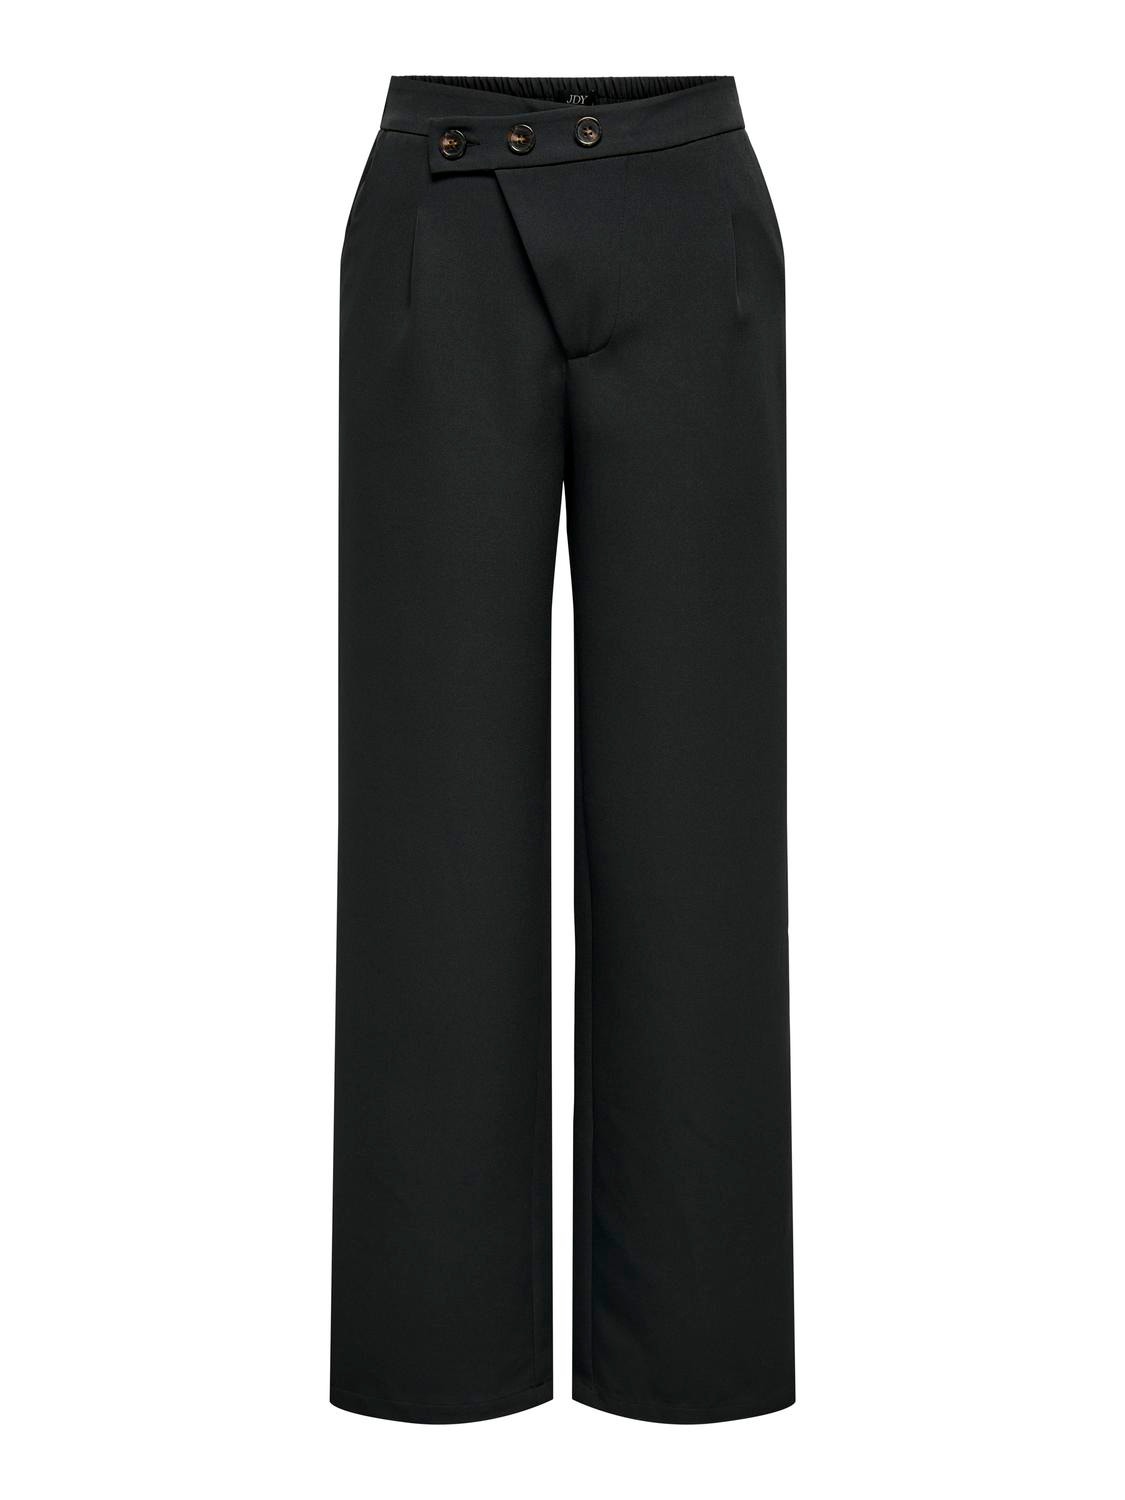 ONLY Classic trousers -Black - 15316634